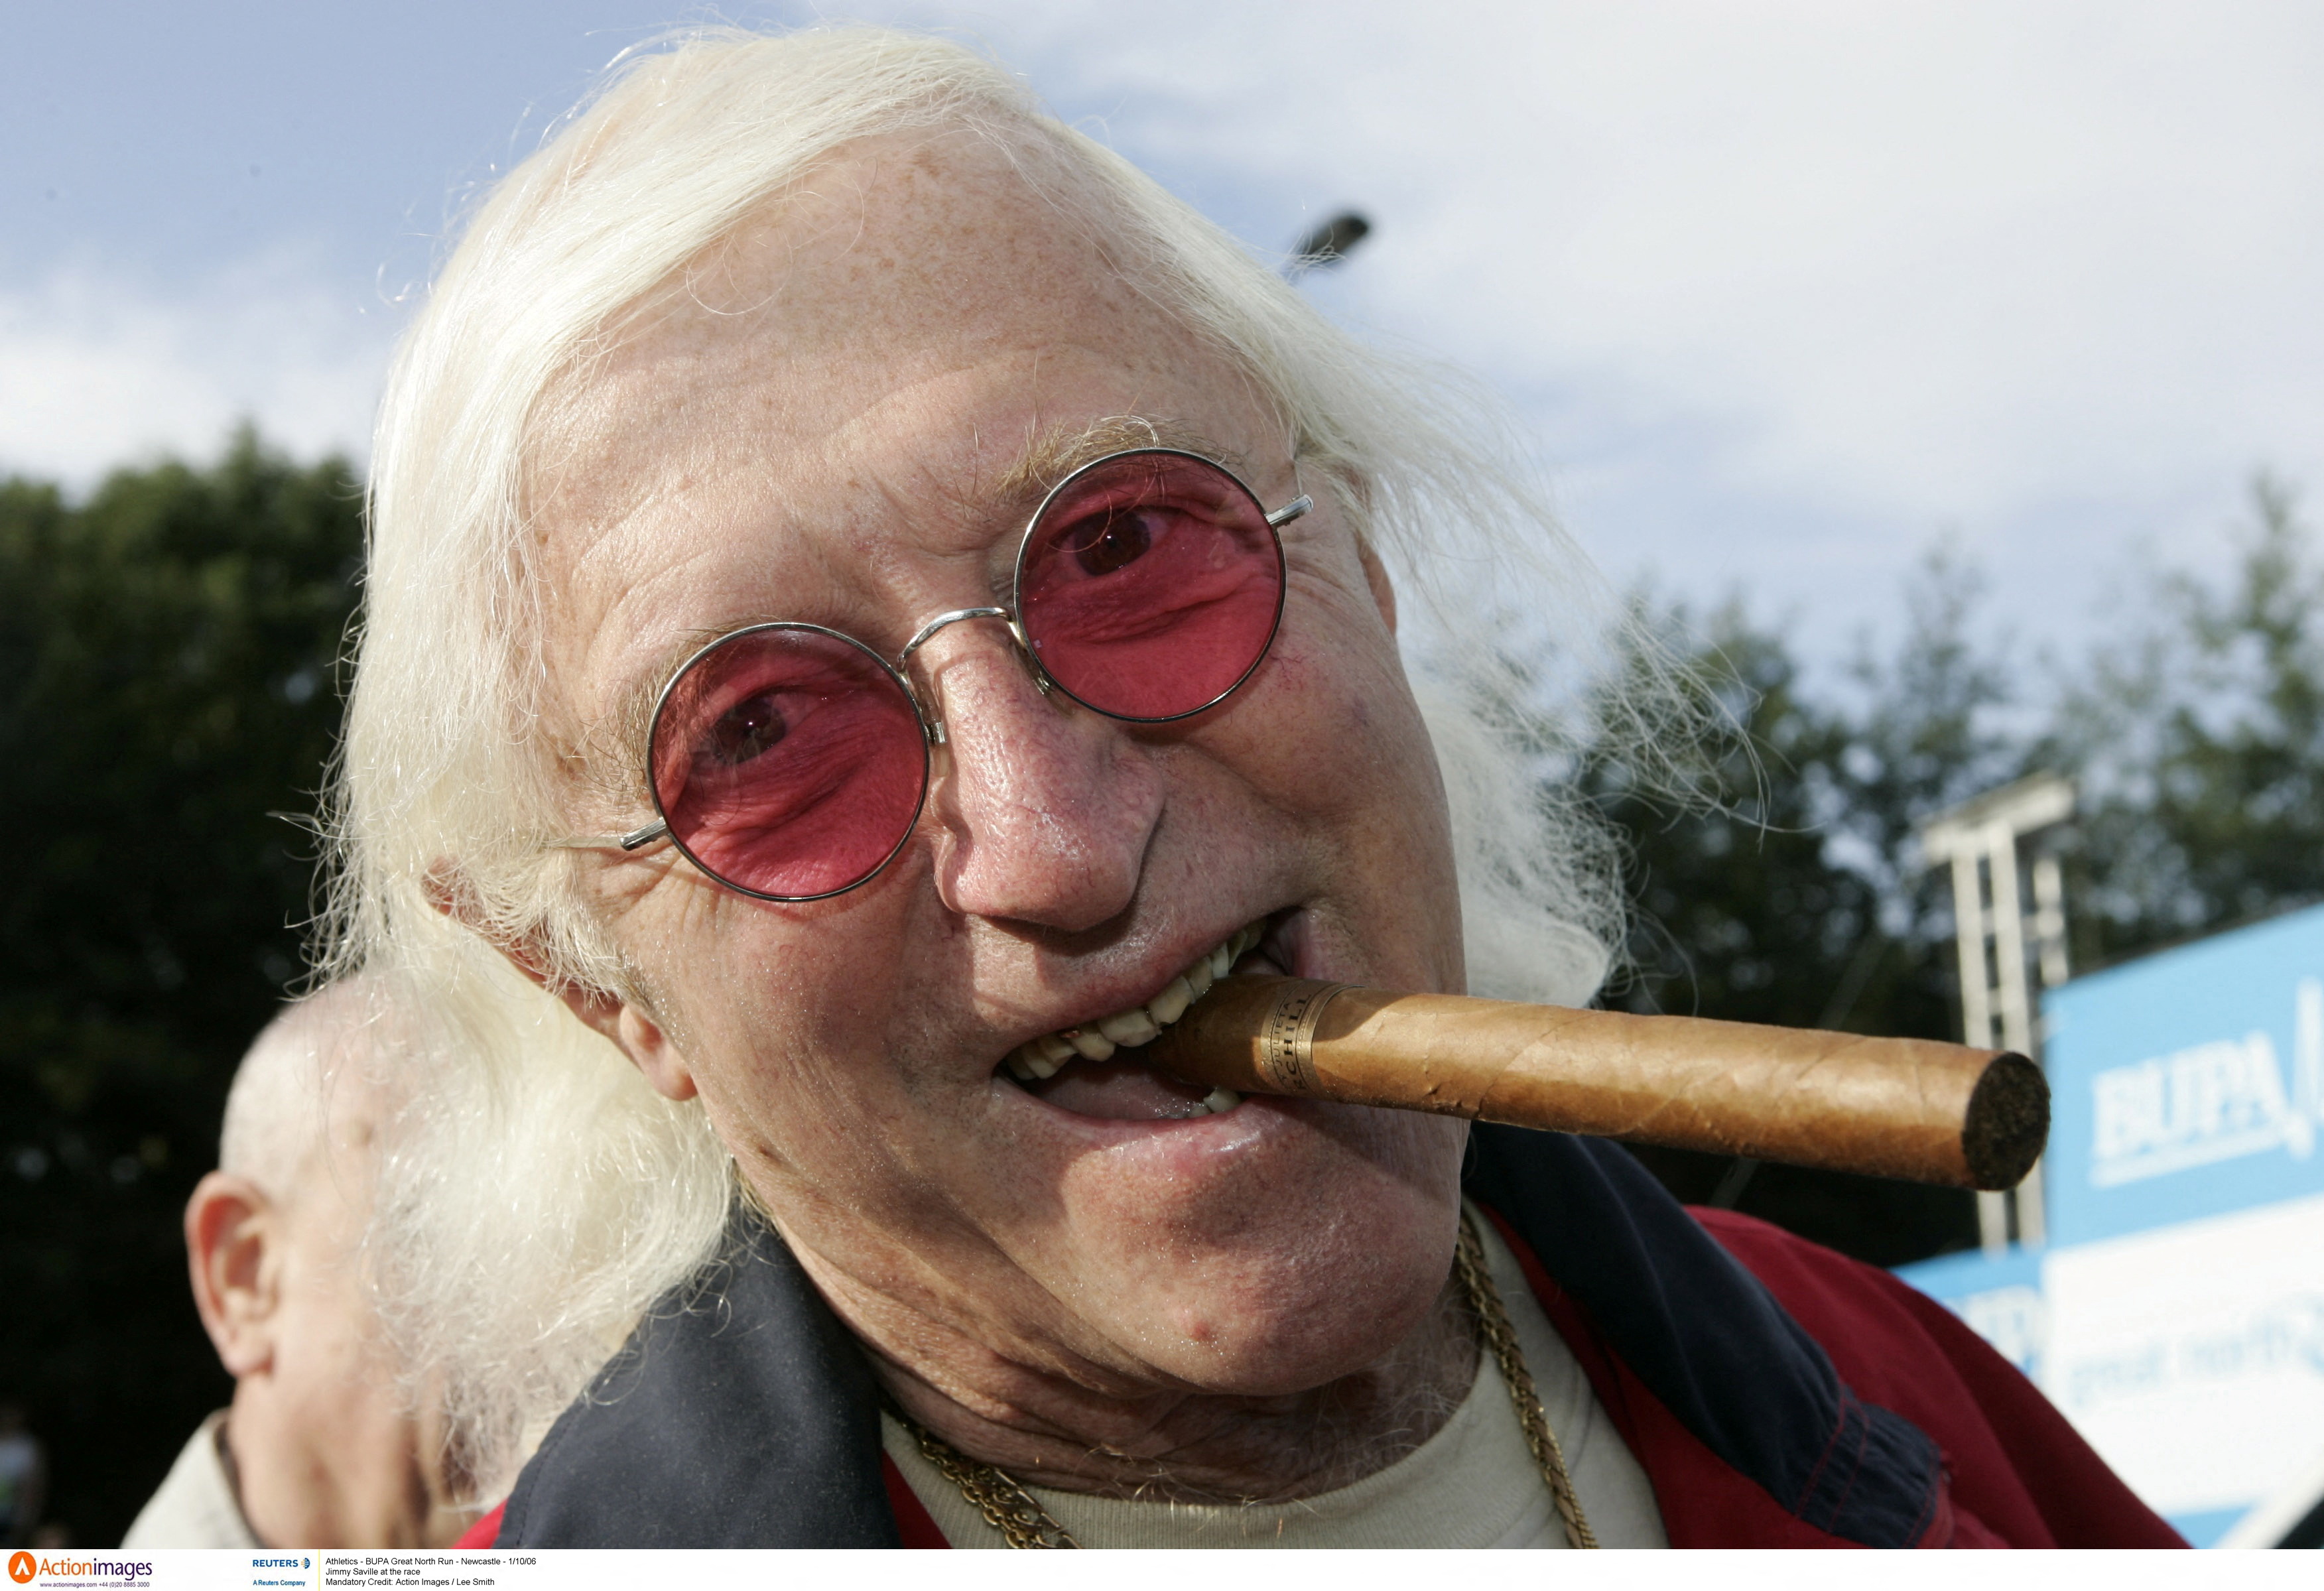 Factbox: Who was Jimmy Savile and what did PM Johnson claim about Labour  leader? | Reuters